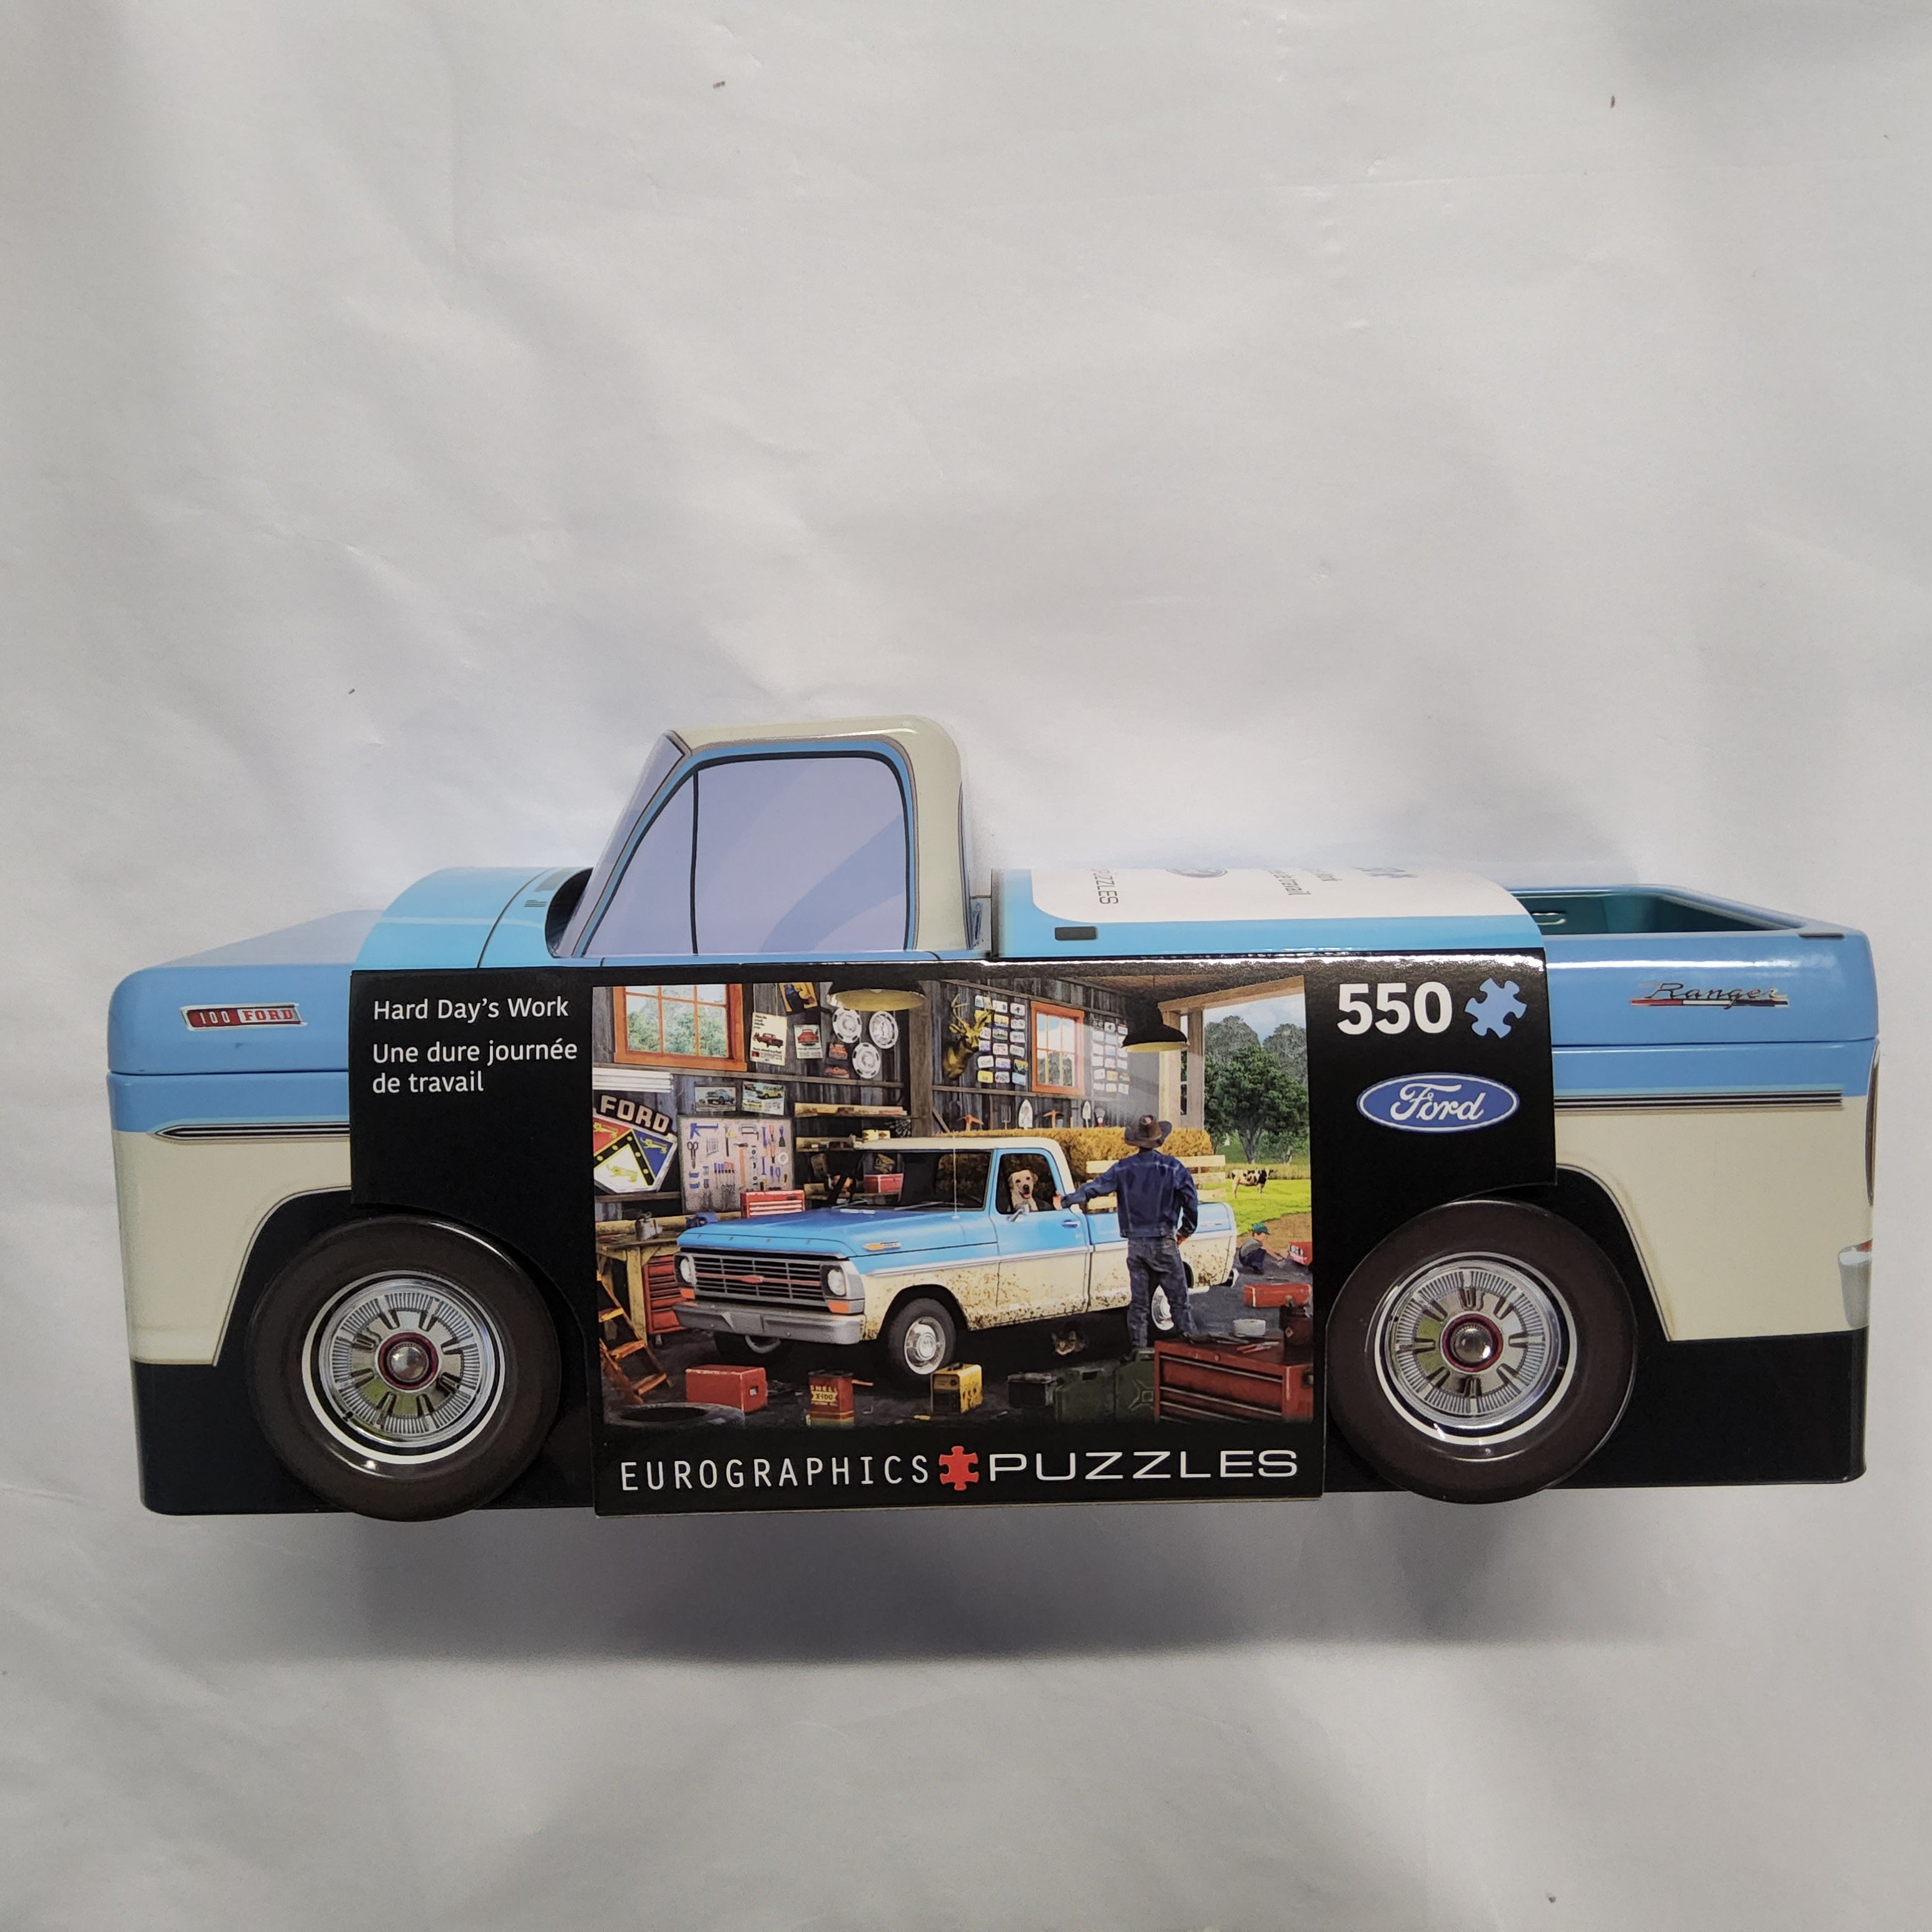 Eurographics Puzzle - Collectible Tin - Ford Truck - Hard Day's Work - 550 pieces - 8551-5781